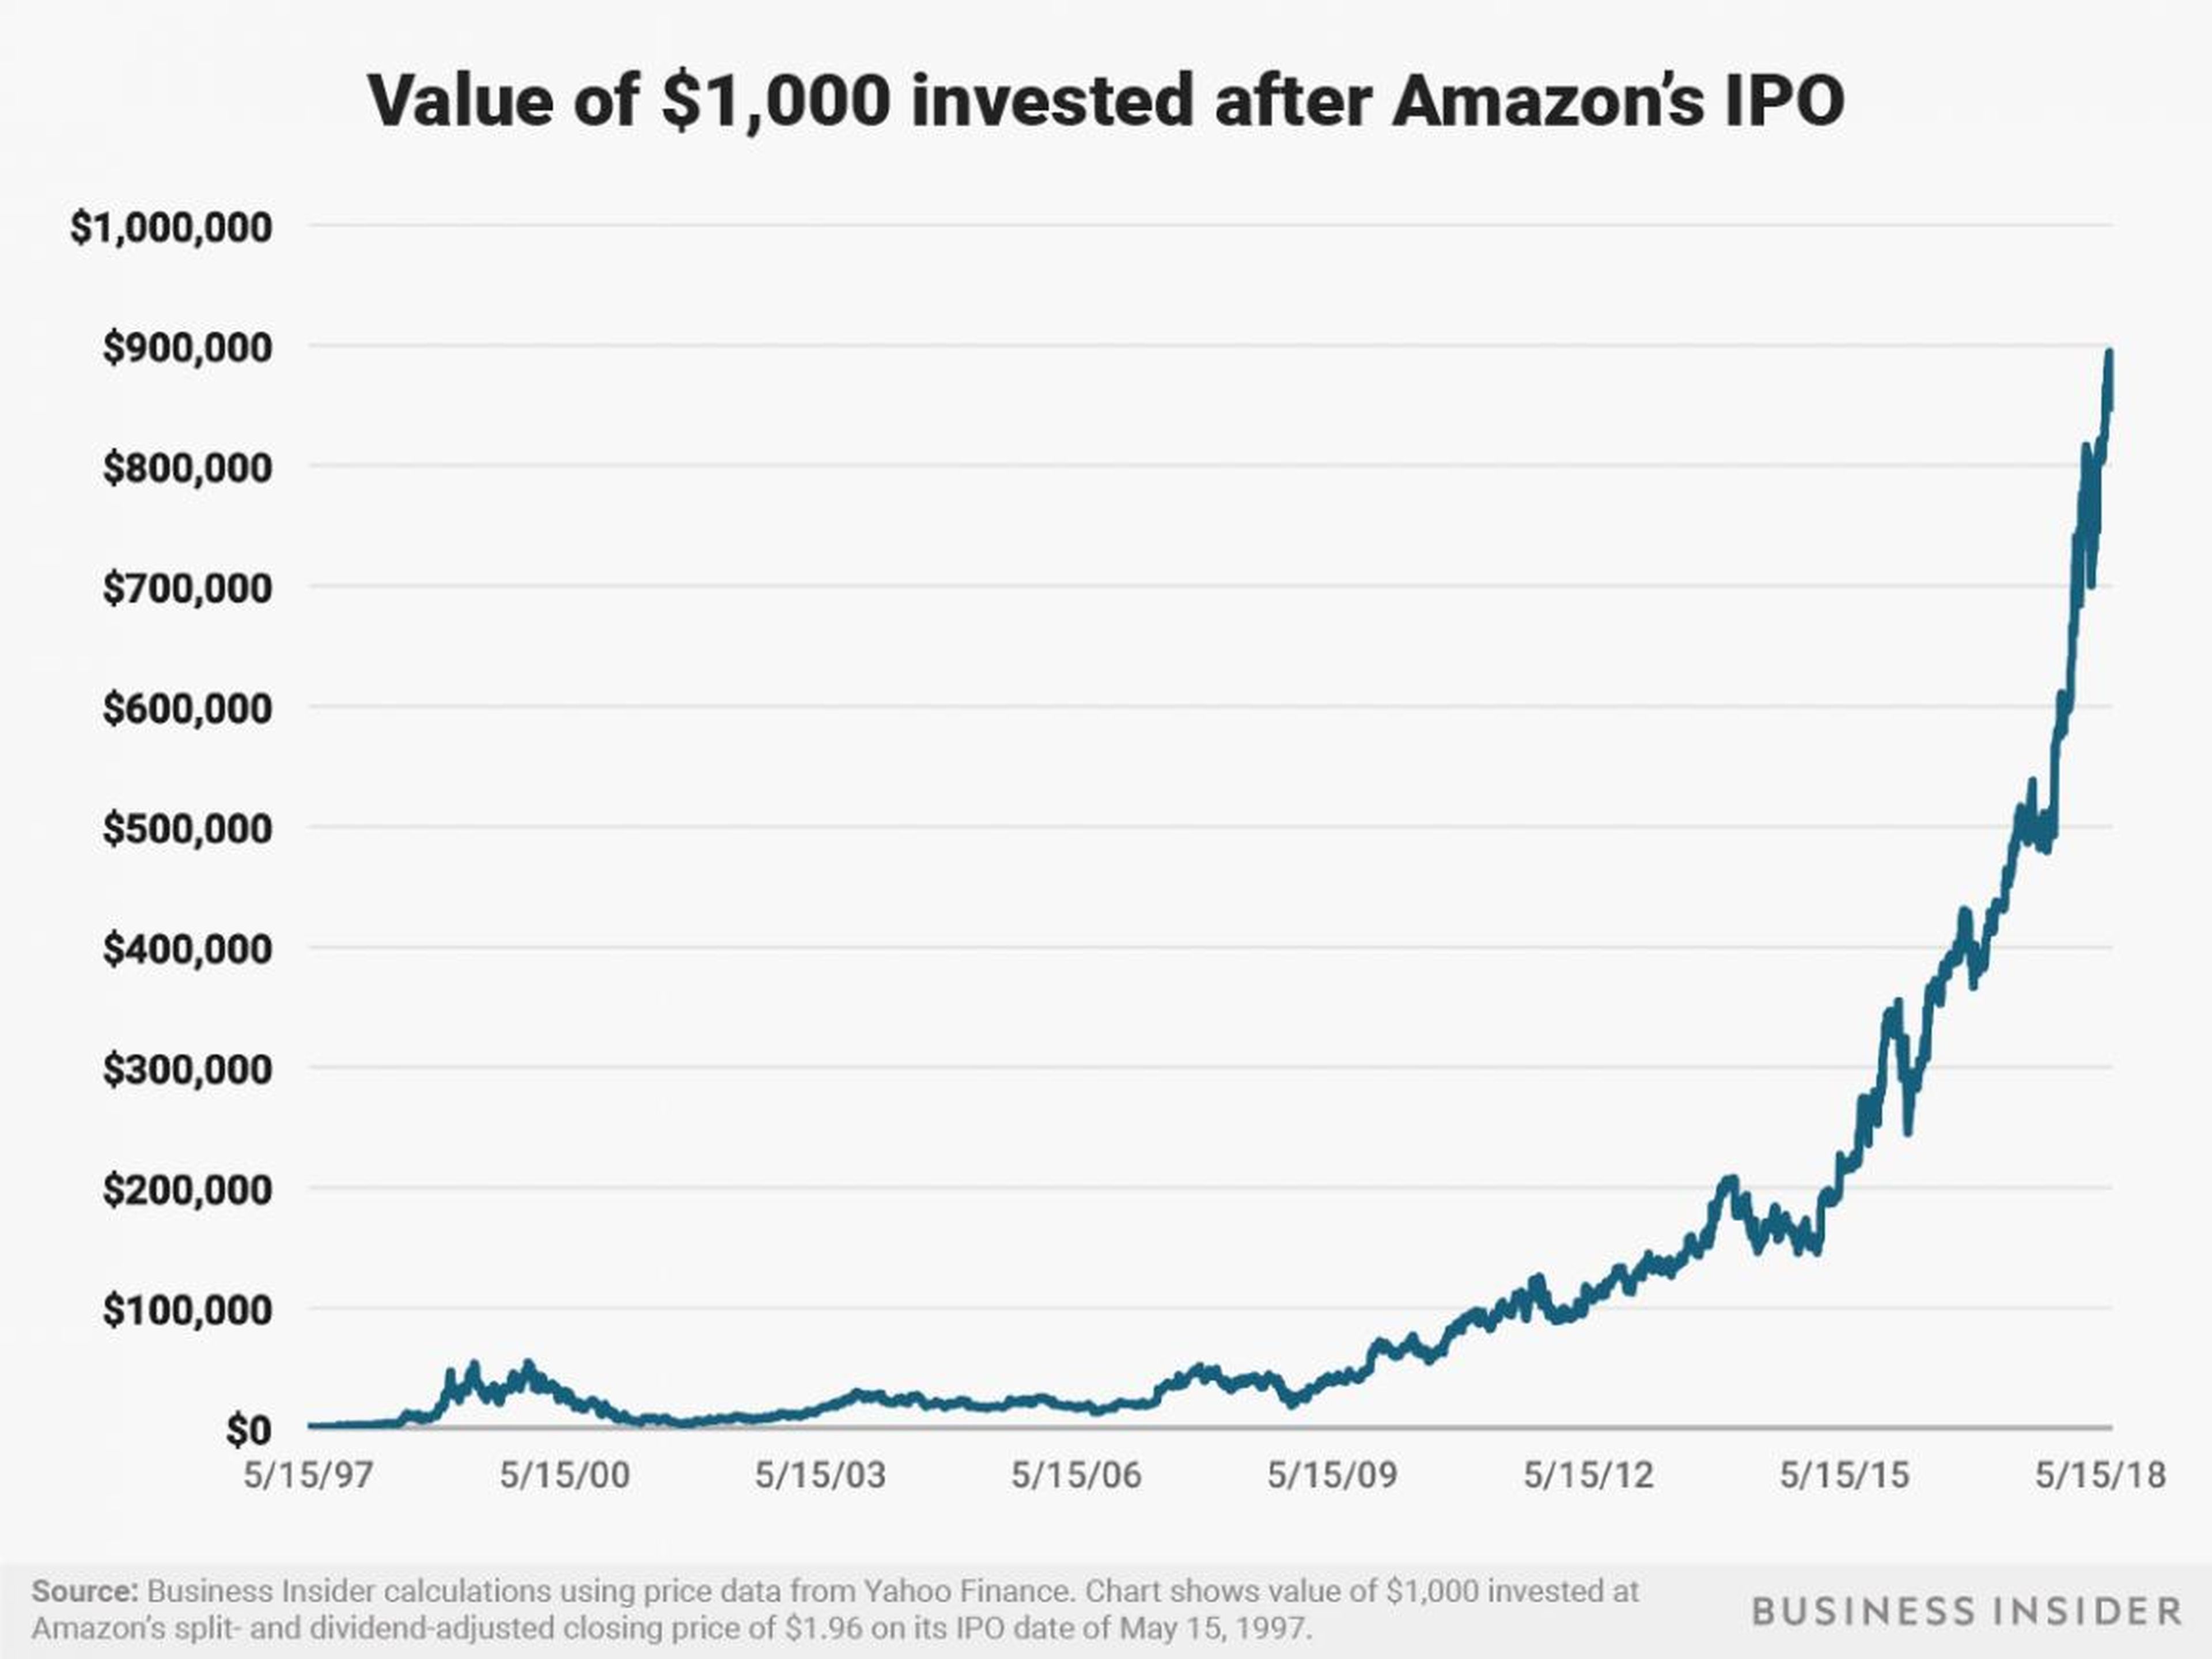 A $1,000 investment in Amazon after its May 15, 1997 IPO would be worth about $865,000 today.